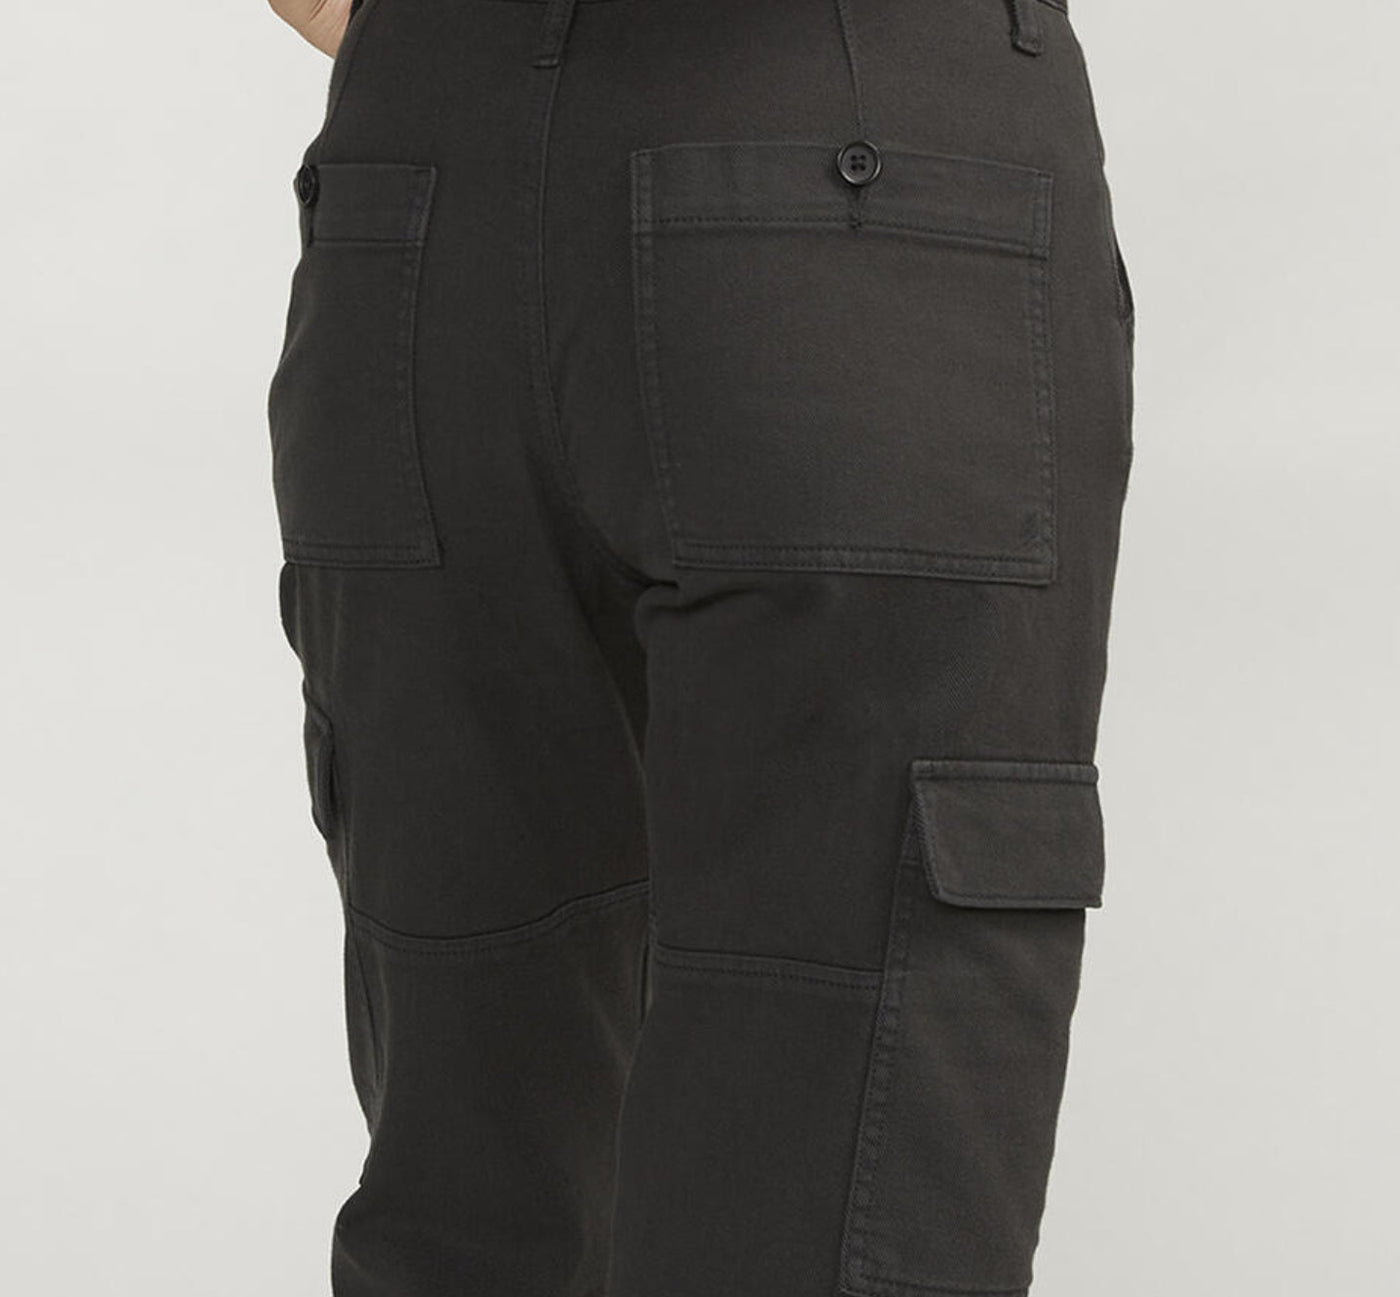 Silver Jeans - Cargo Pant - Black